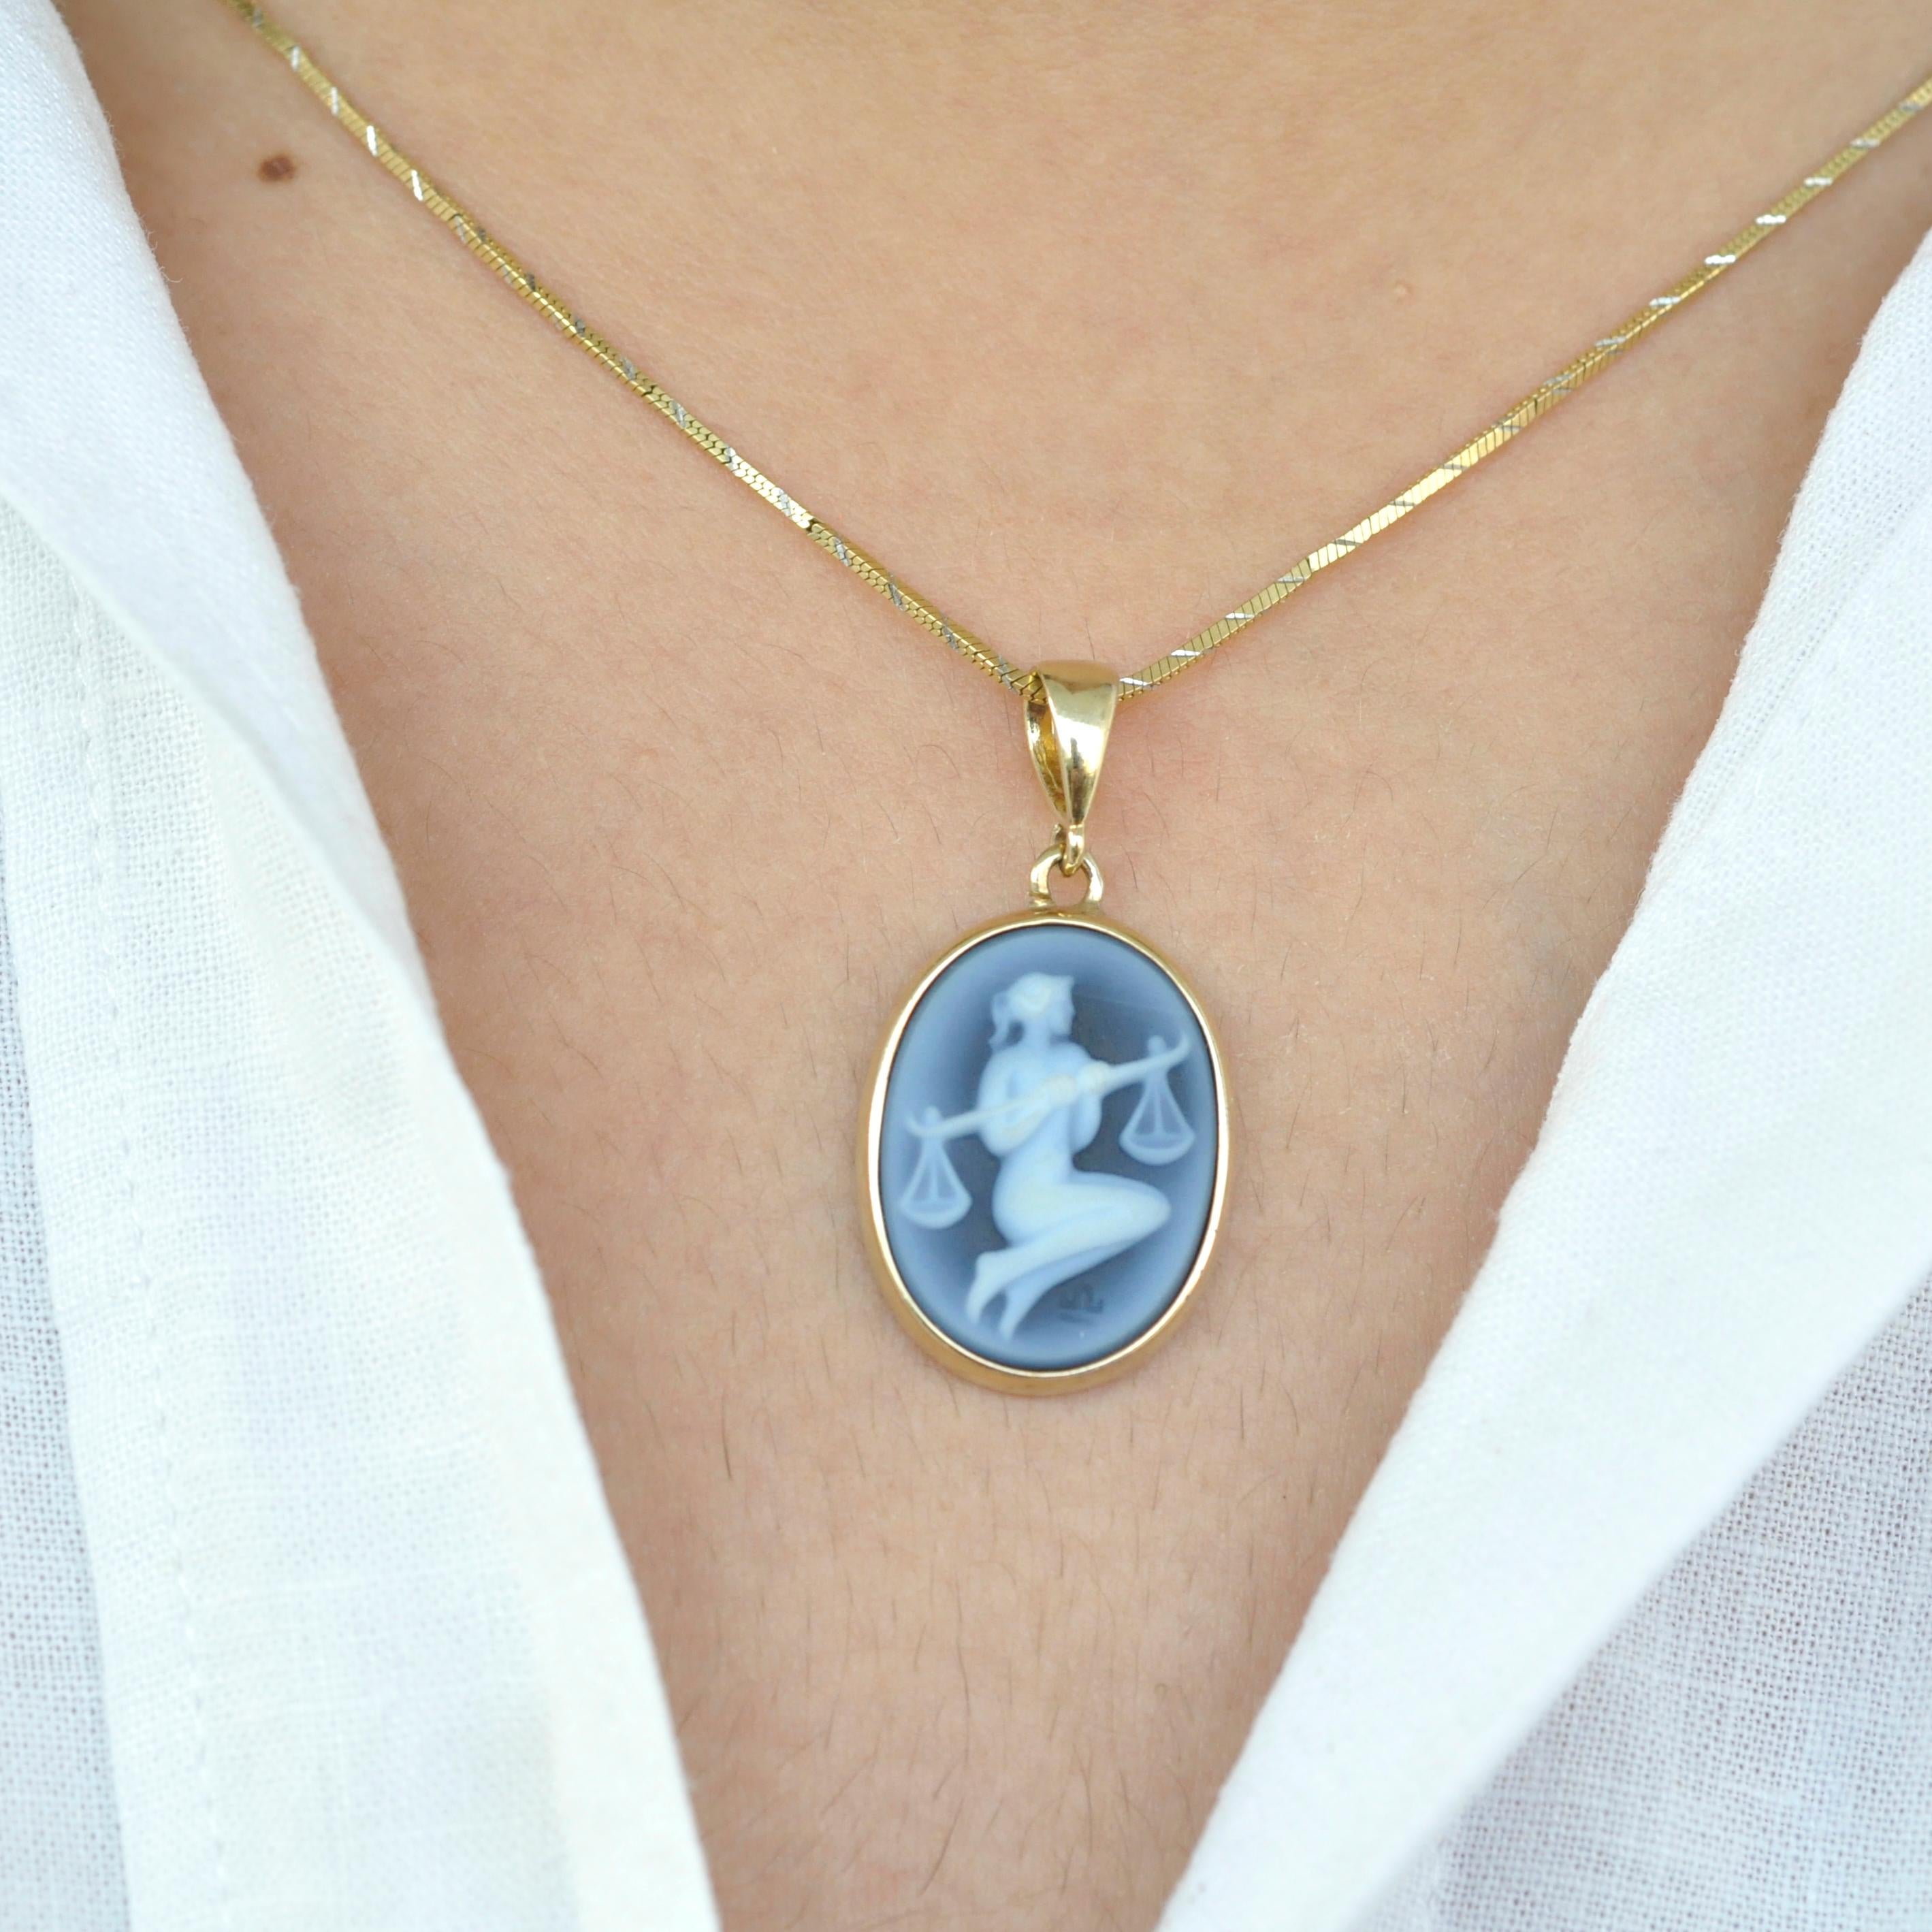 Here's our libra zodiac carving cameo pendant necklace from the zodiac collection. The cameo is made in Germany by an expert cameo engraver on the relief of 100% natural agate rock from Brazil (a variety of chalcedony). The pendant is set in our